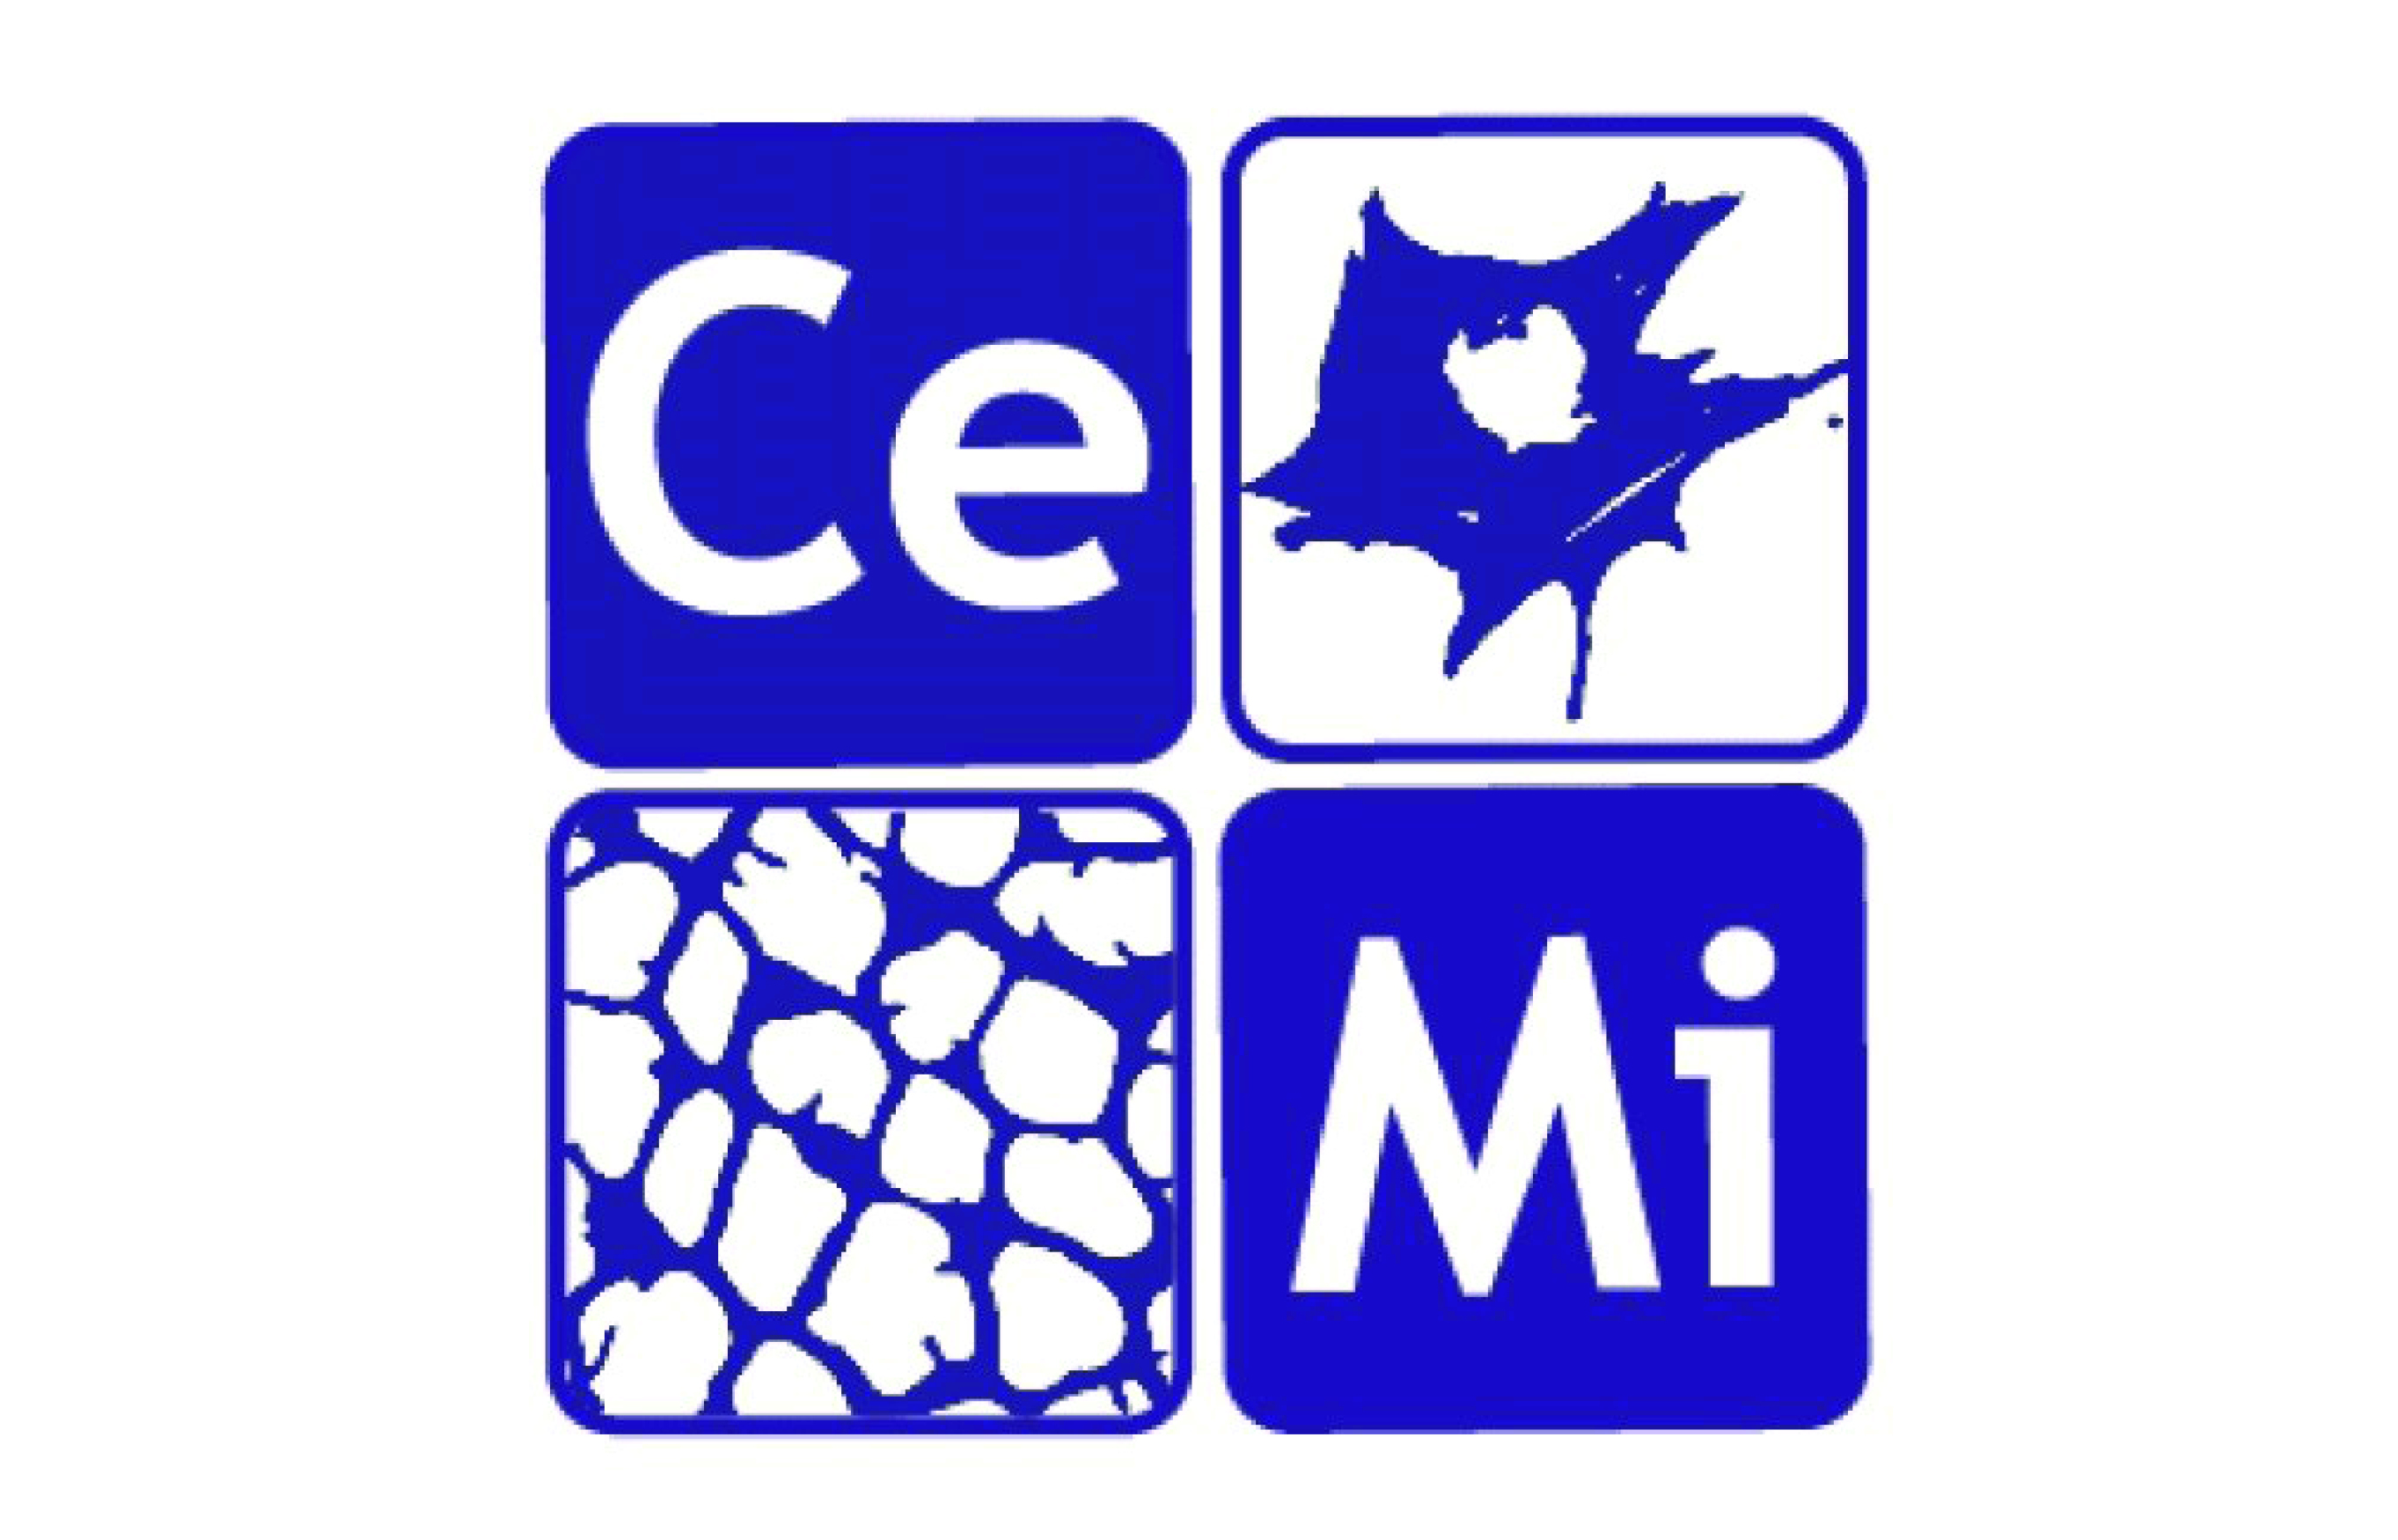 This is the logo for the Centre for Cellular Microenvironment centre